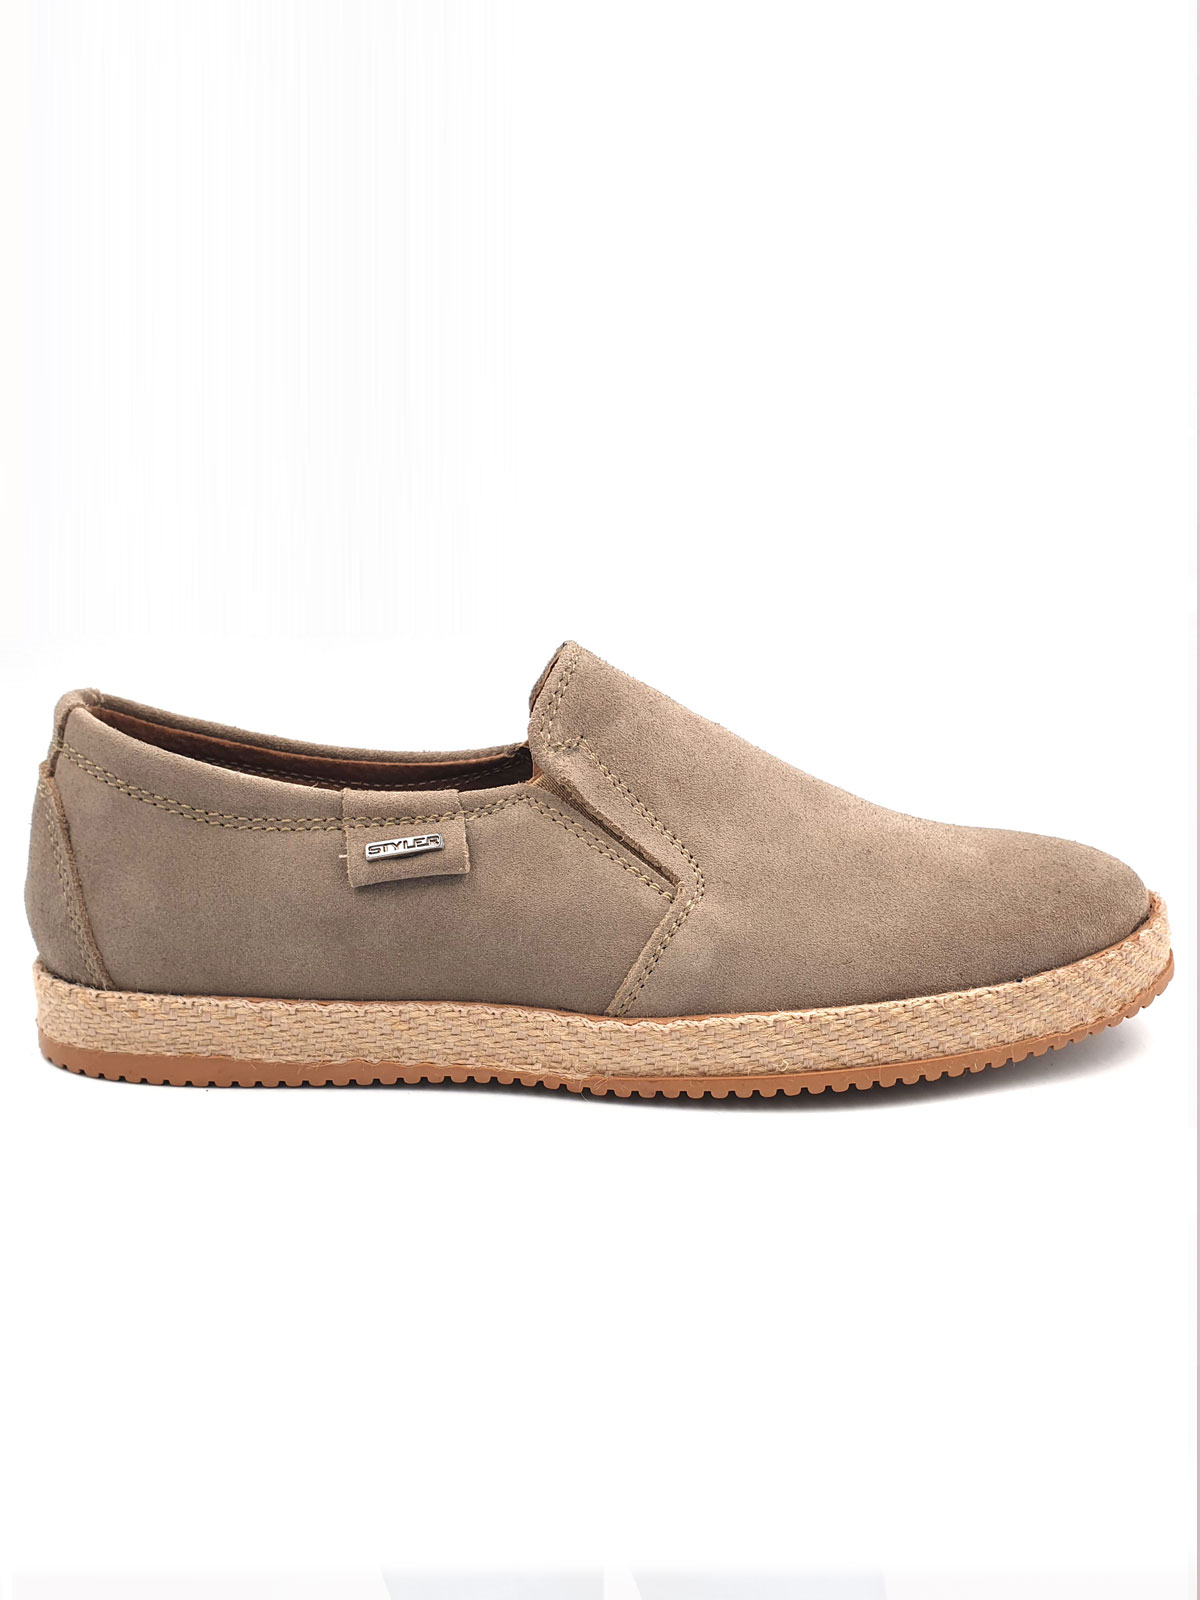 Mens shoes in beige color - 81094 - € 78.18 img2